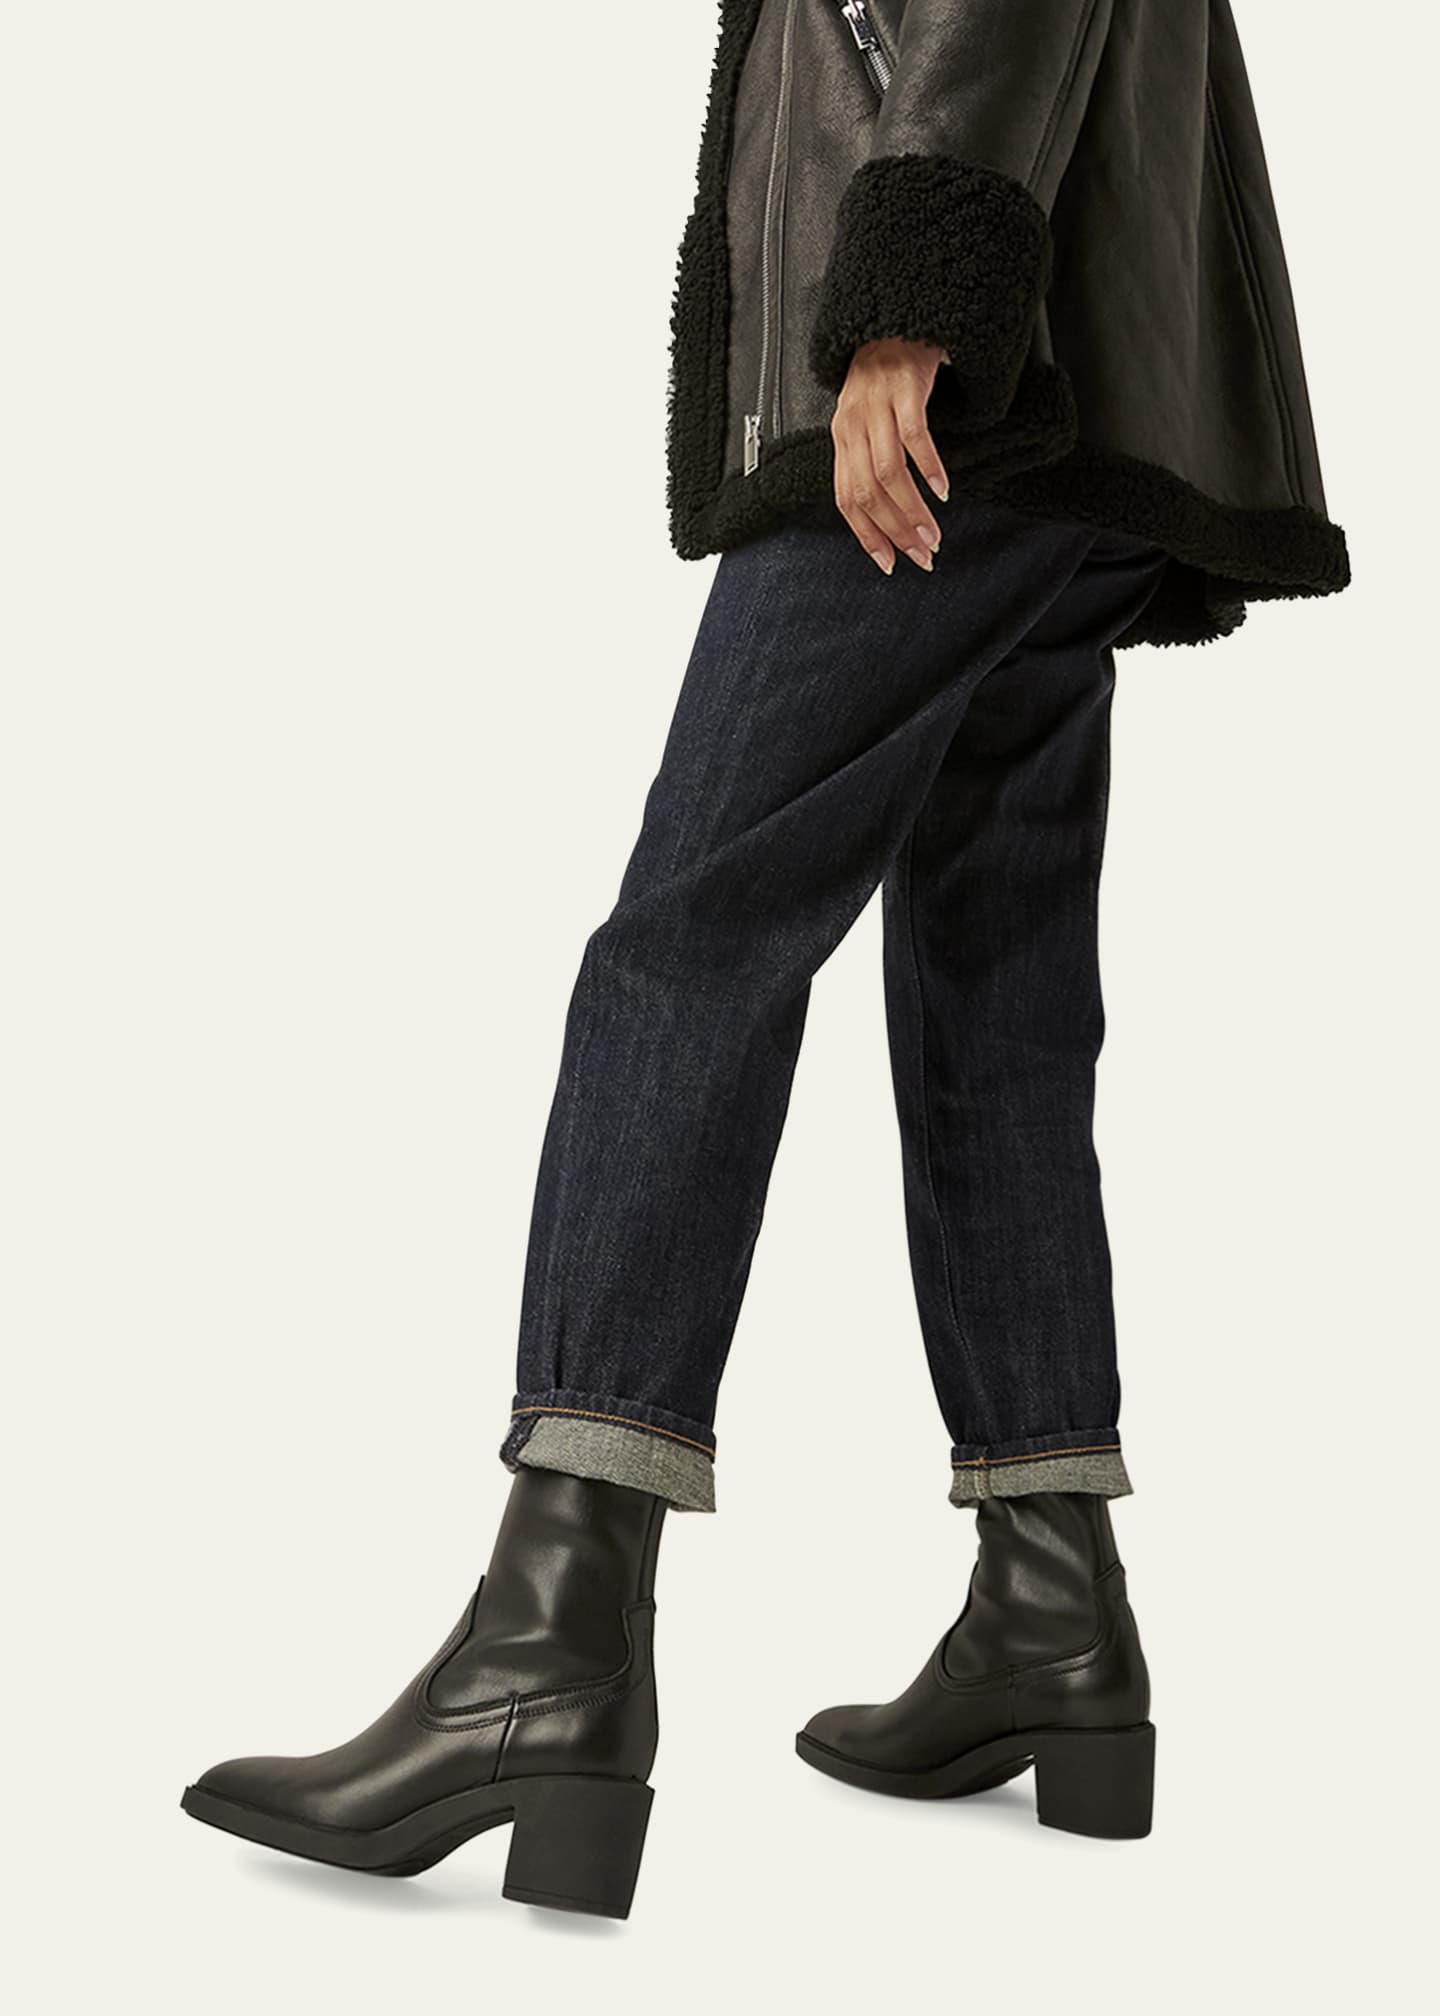 La Canadienne Parks Leather Western Mid Boots - Bergdorf Goodman